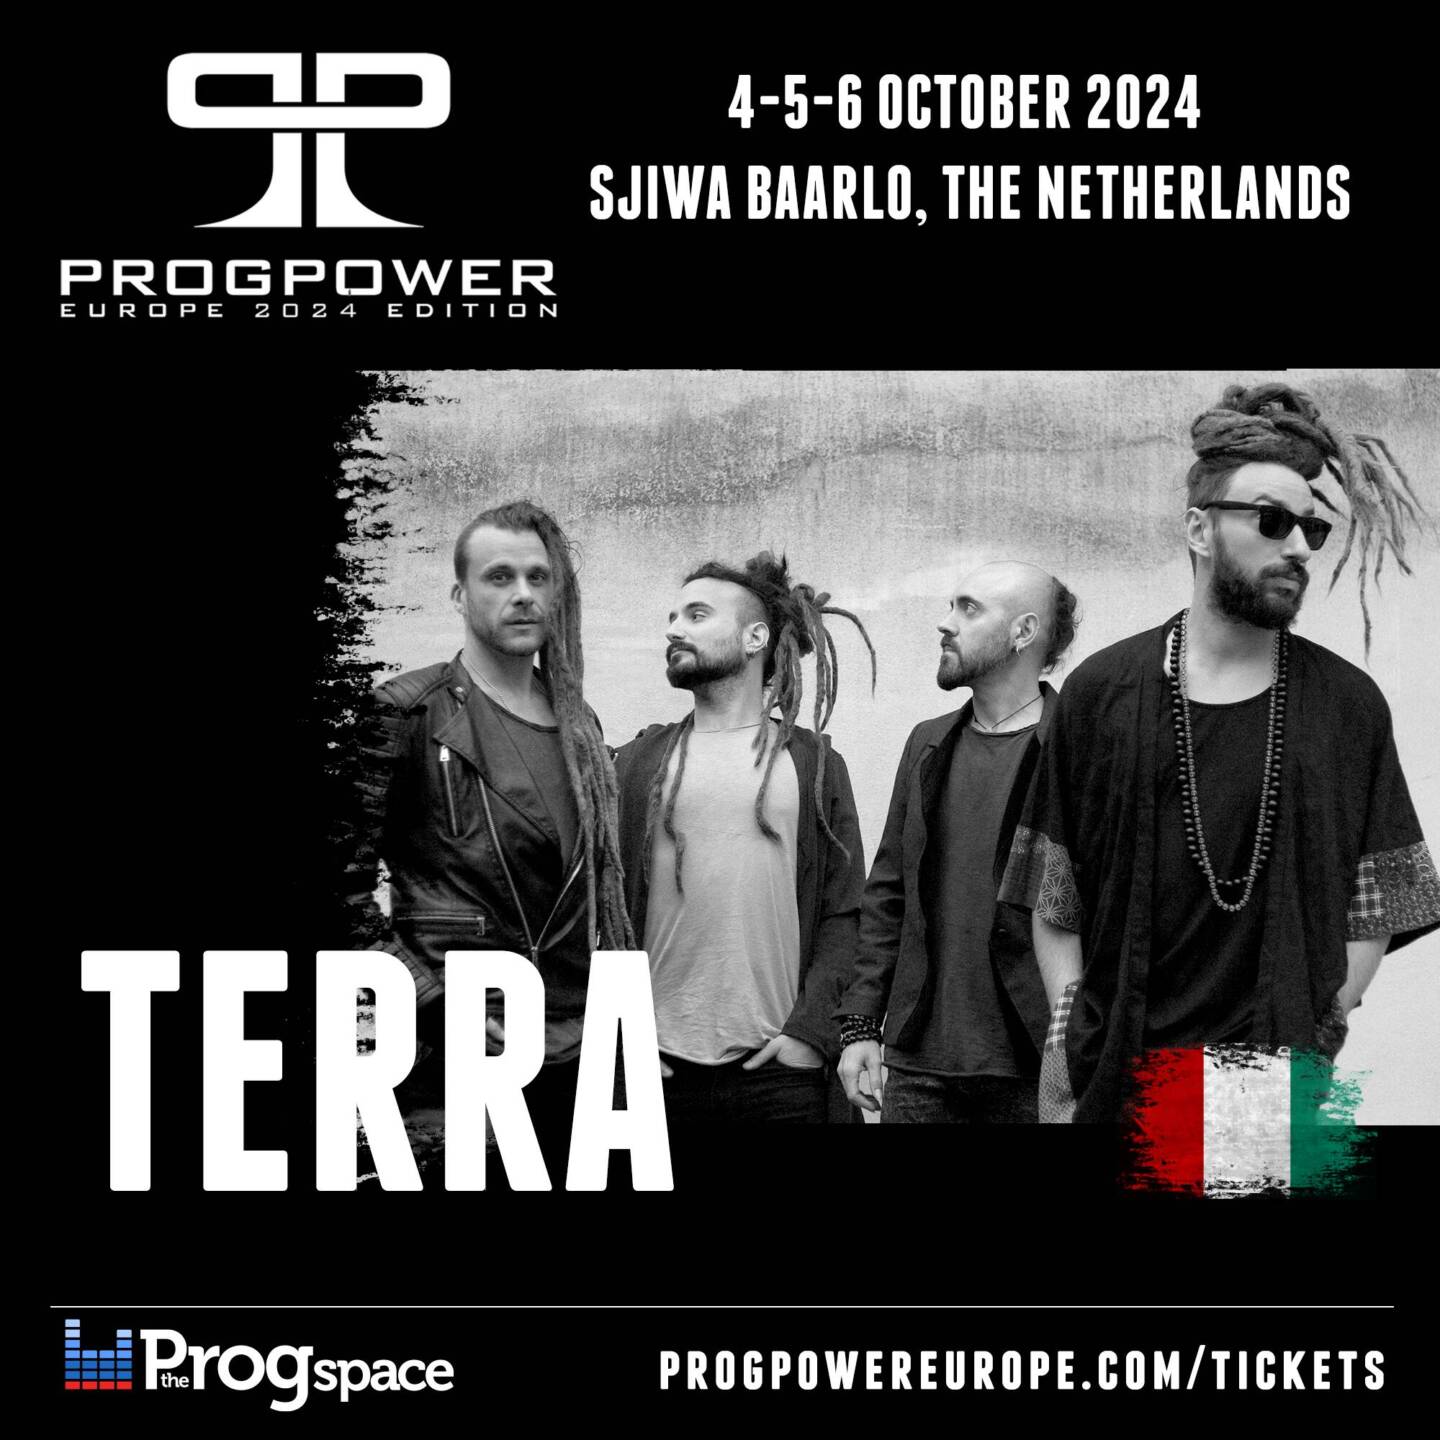 Terra from Italy is the 6th band anounced for ProgPower Europe 2024!